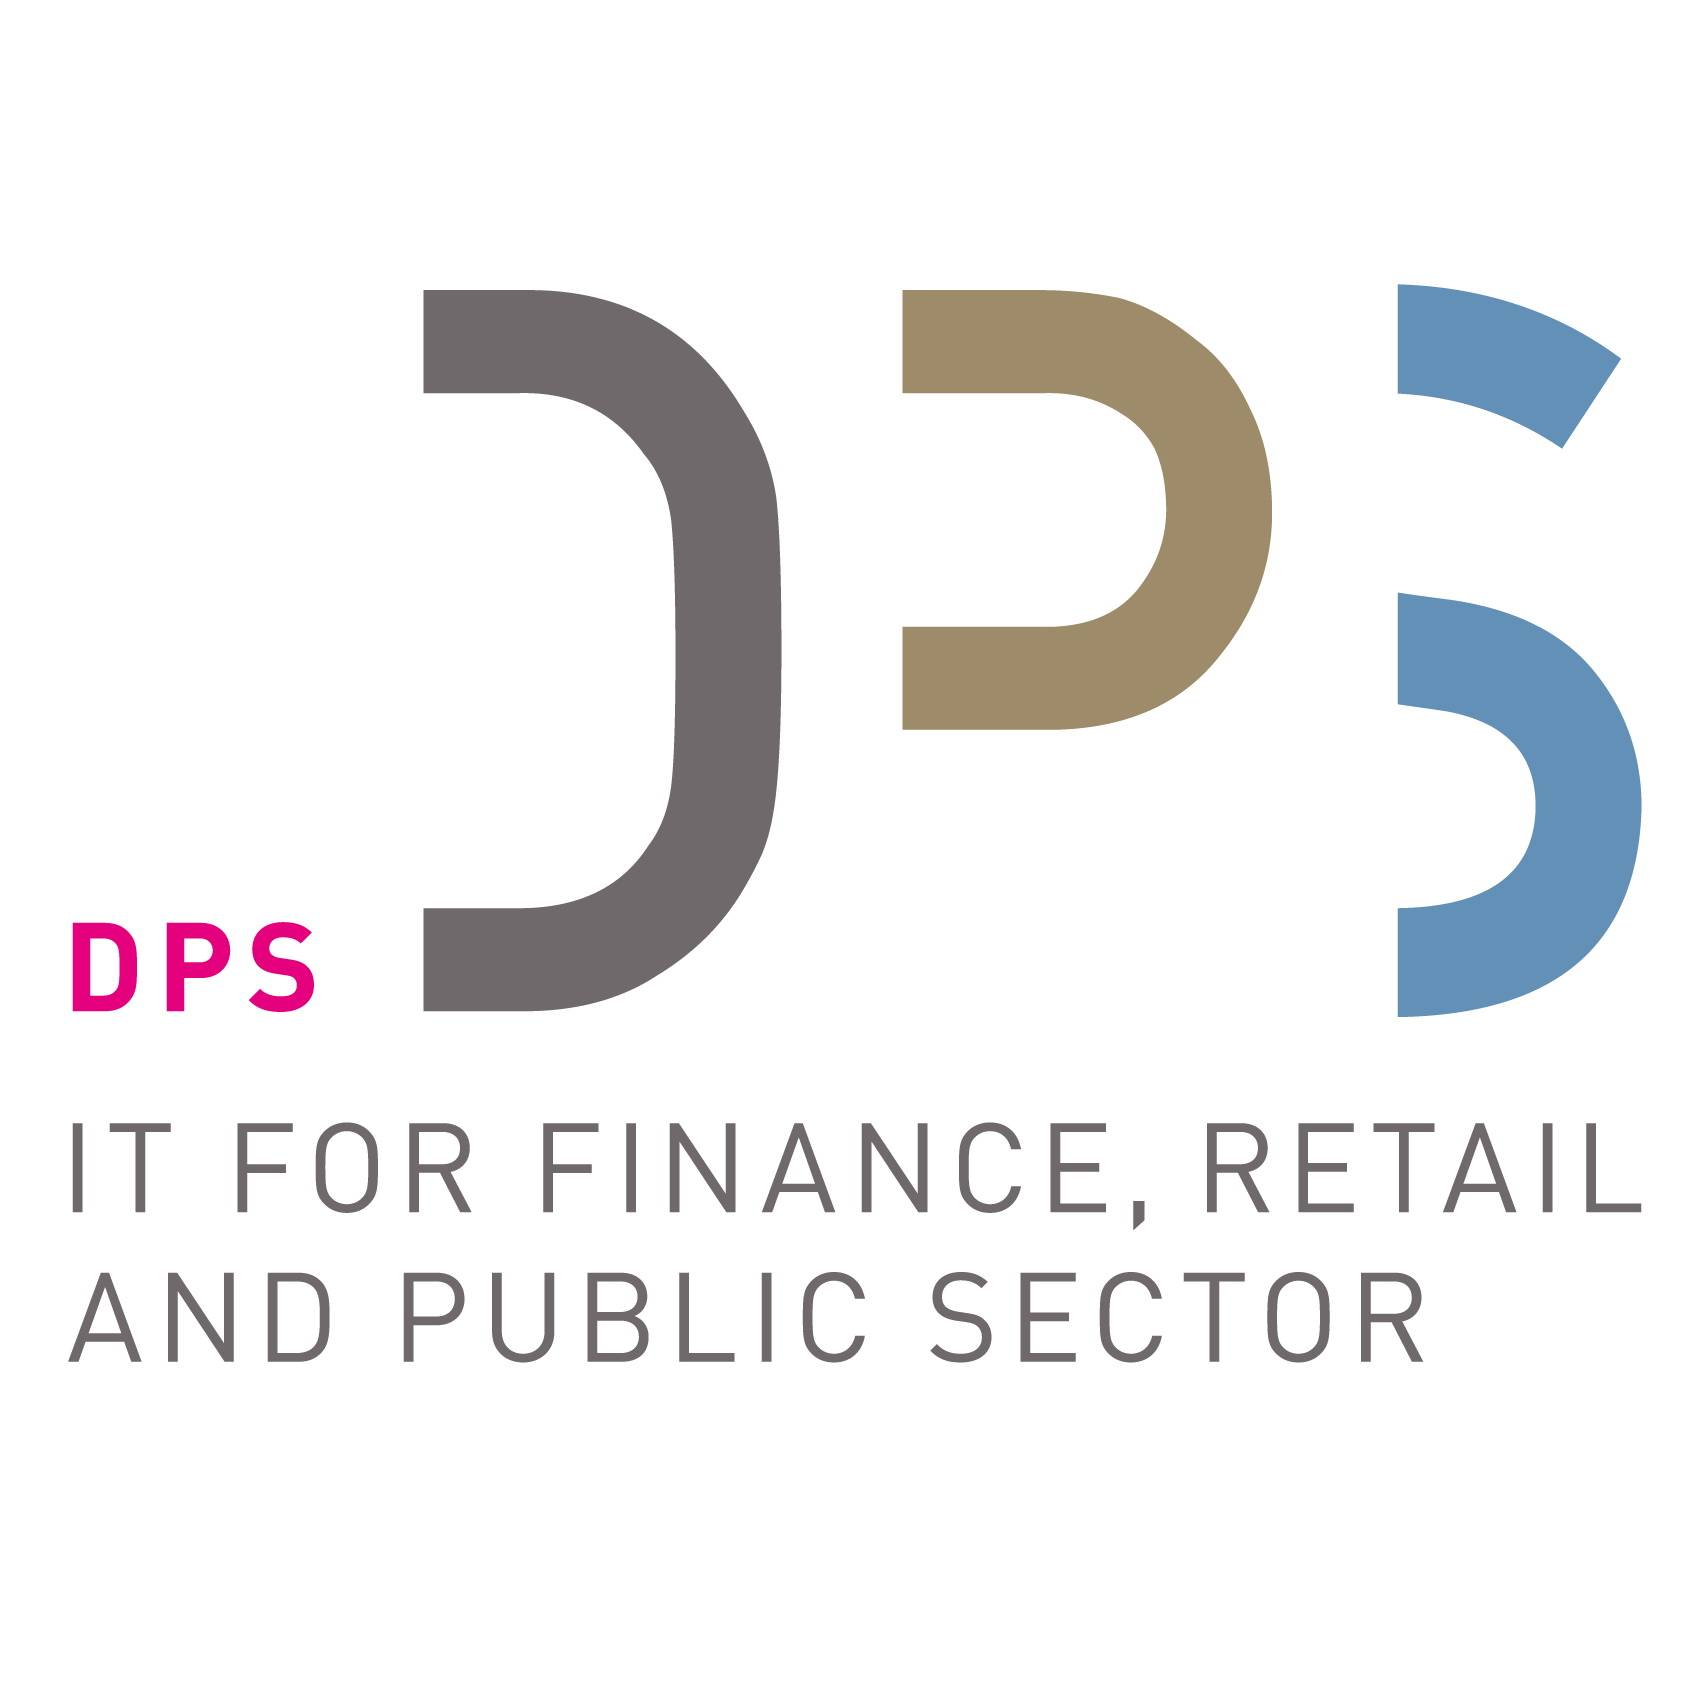 DPS - IT for Finance, Retail and Public Sector